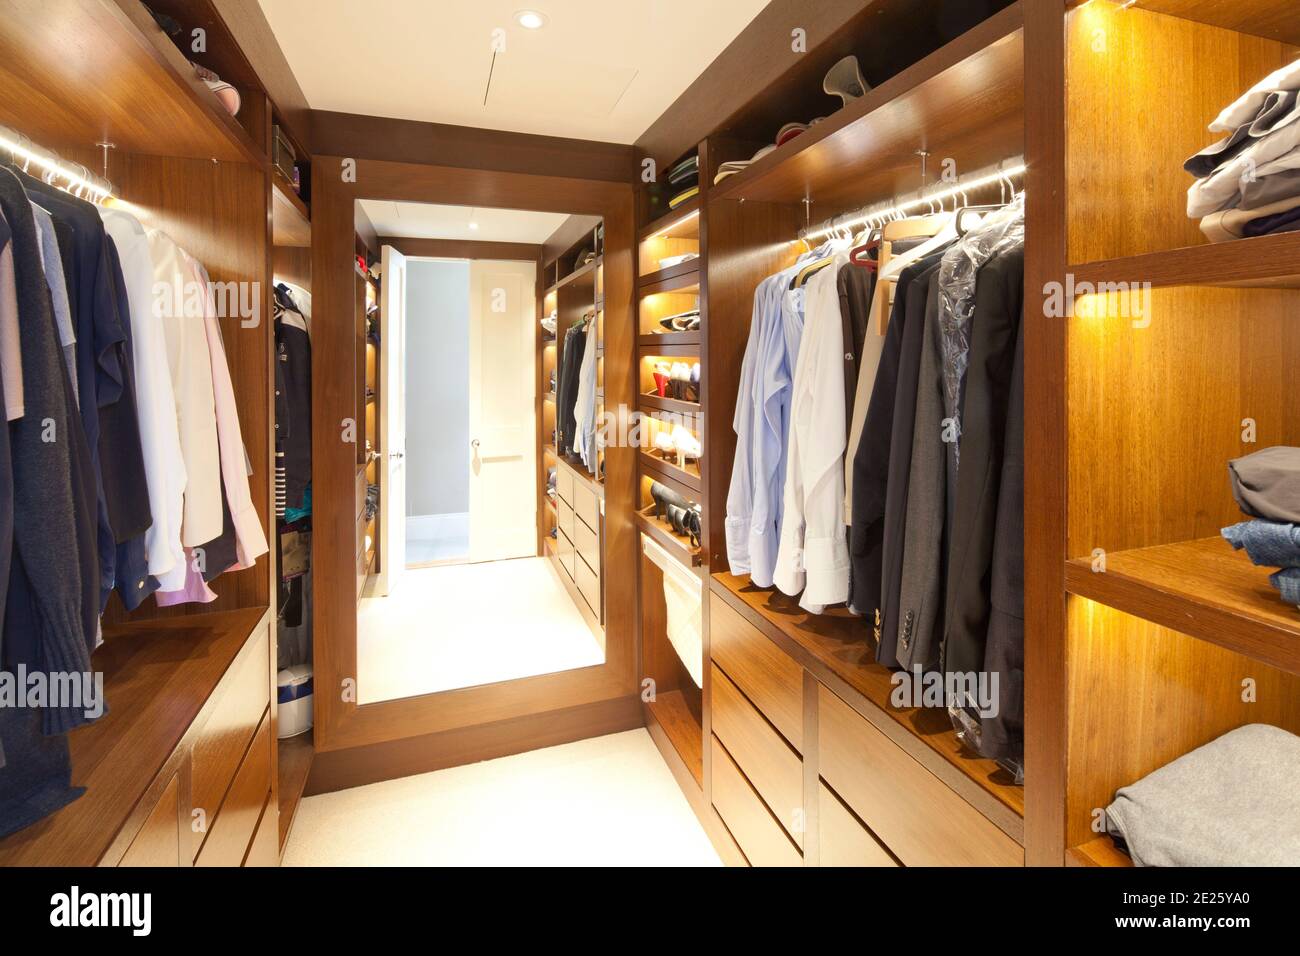 Wood-lined and shelved dressing room with hanging and folded clothes and mirror Stock Photo